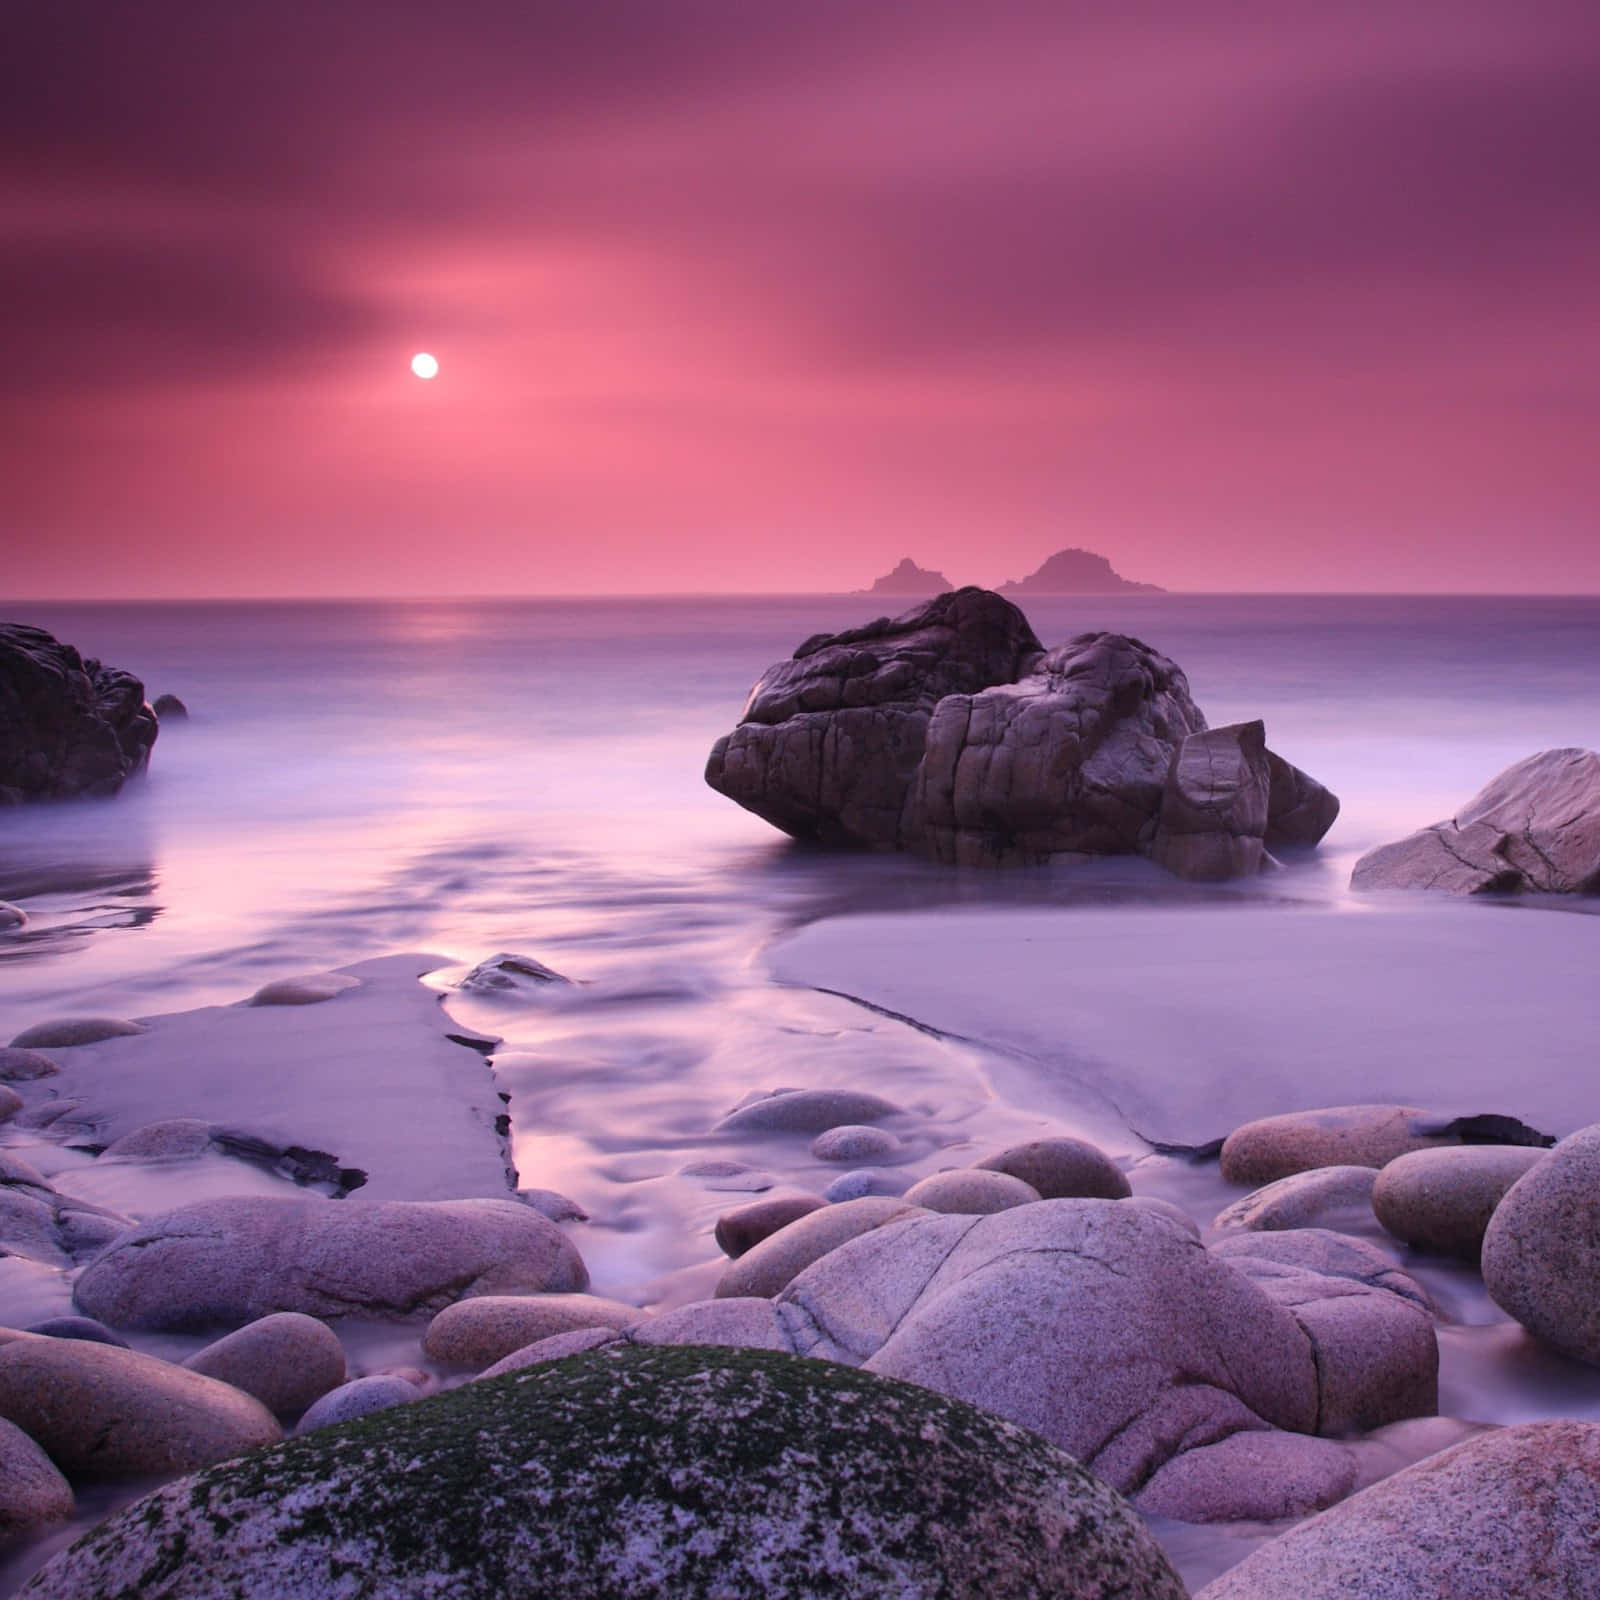 A Pink Sunset Over Rocks And Water